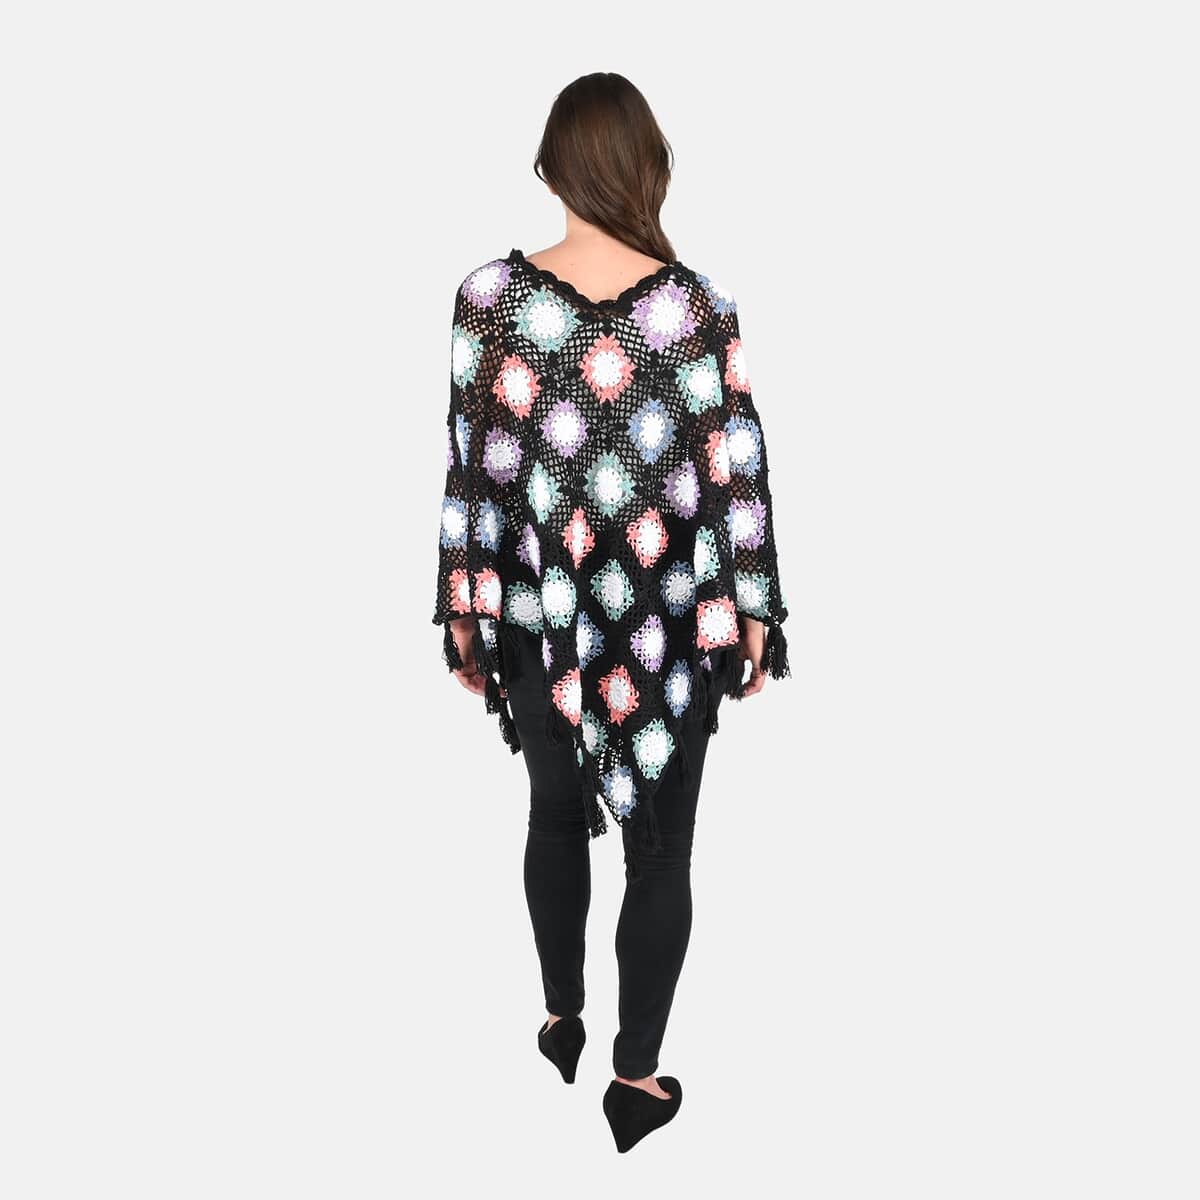 Passage Women's Cotton Poncho Crochet Black and Multi Color Square Poncho (One Size) image number 1